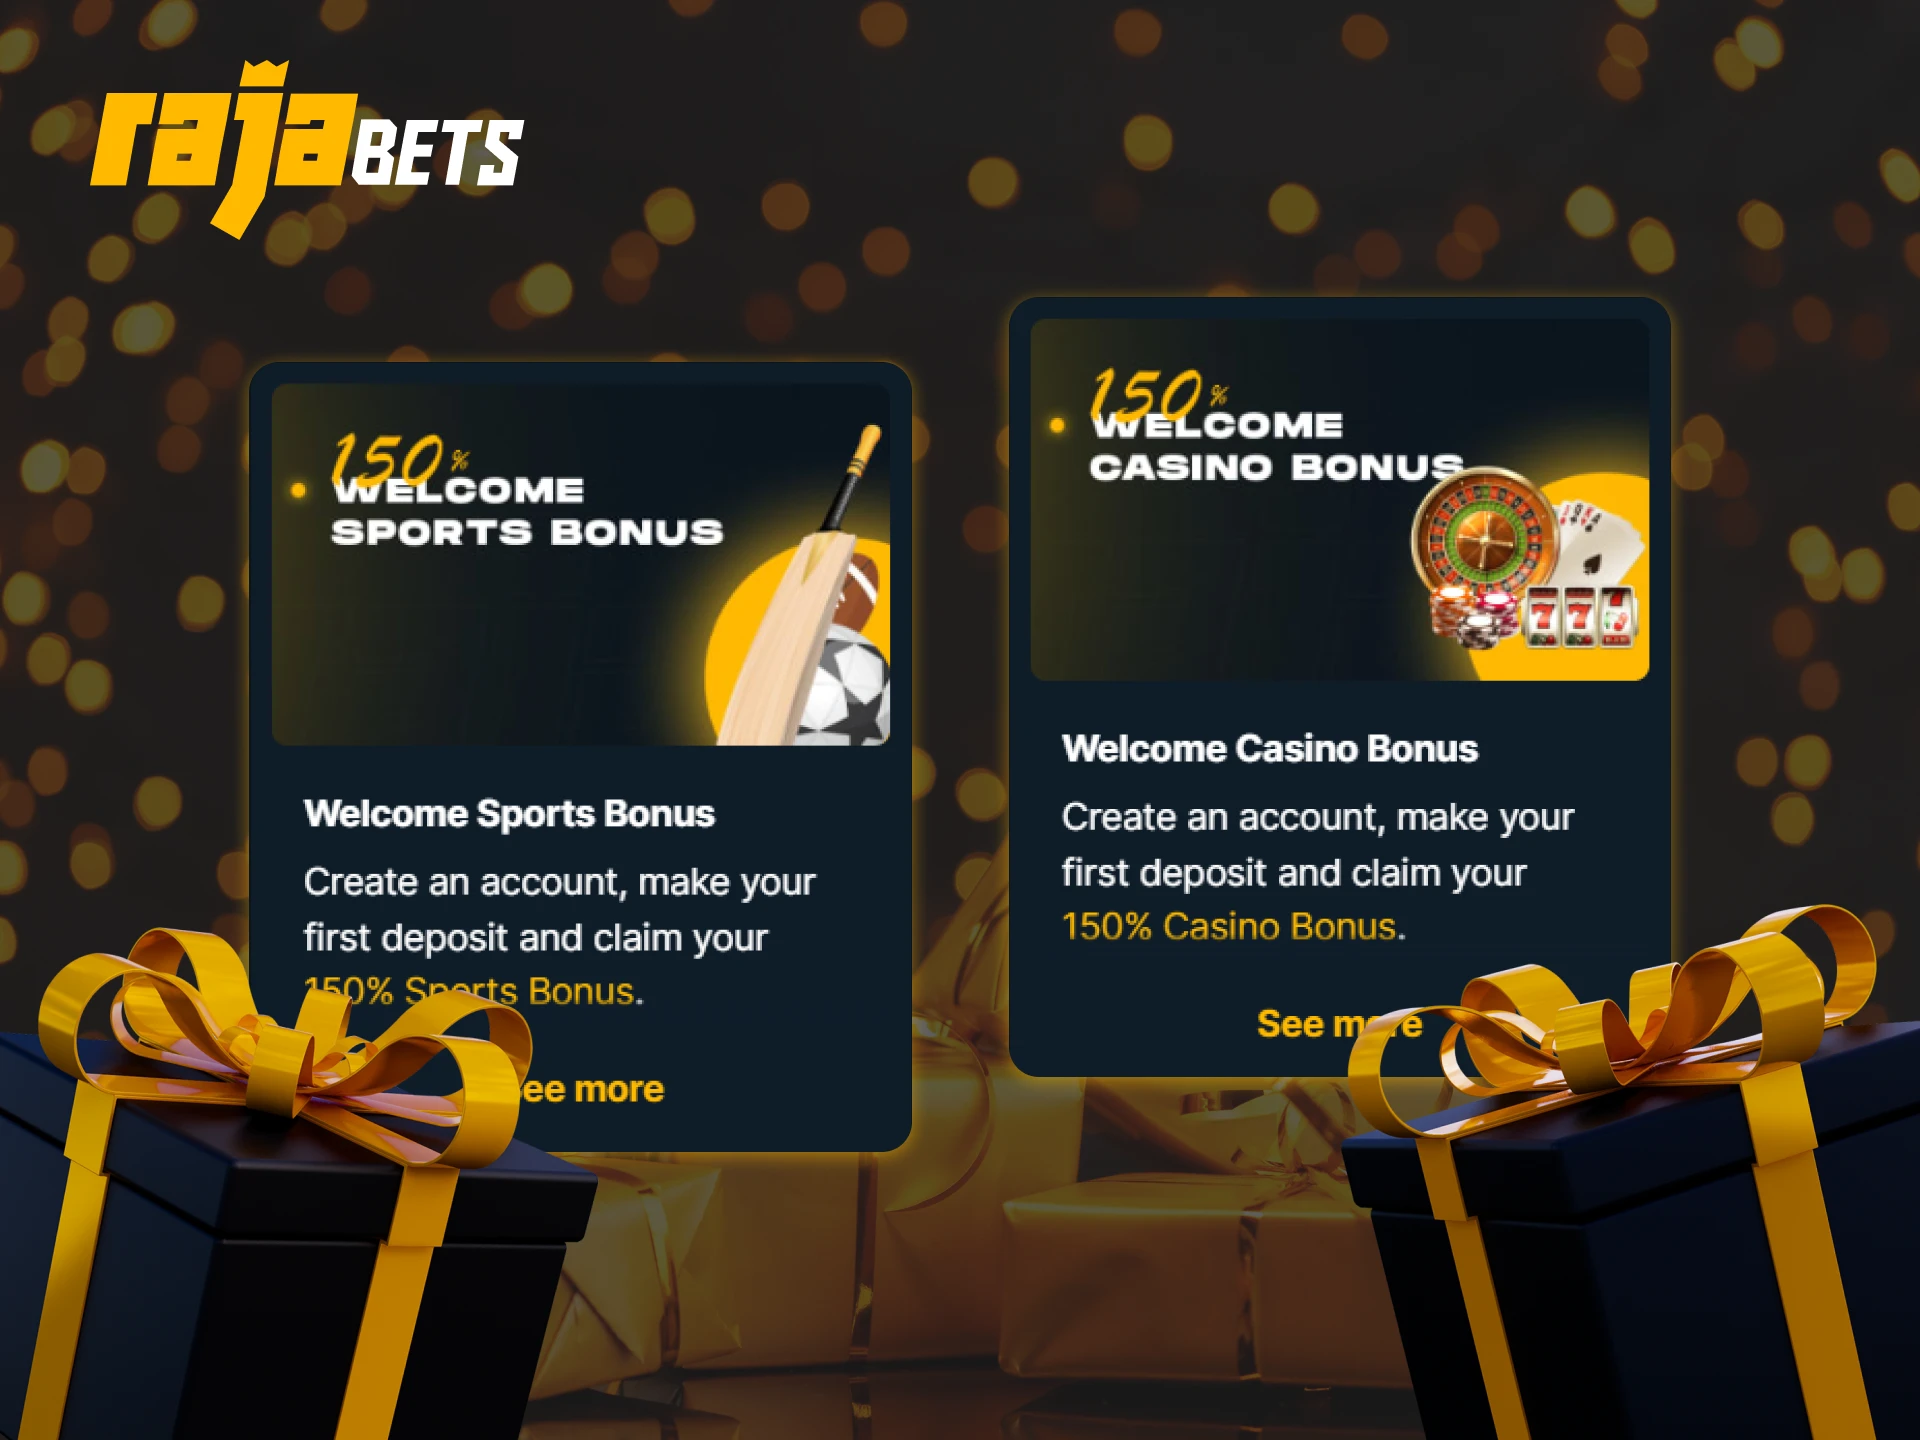 After registering with Rajabets, you will receive a nice welcome bonus.